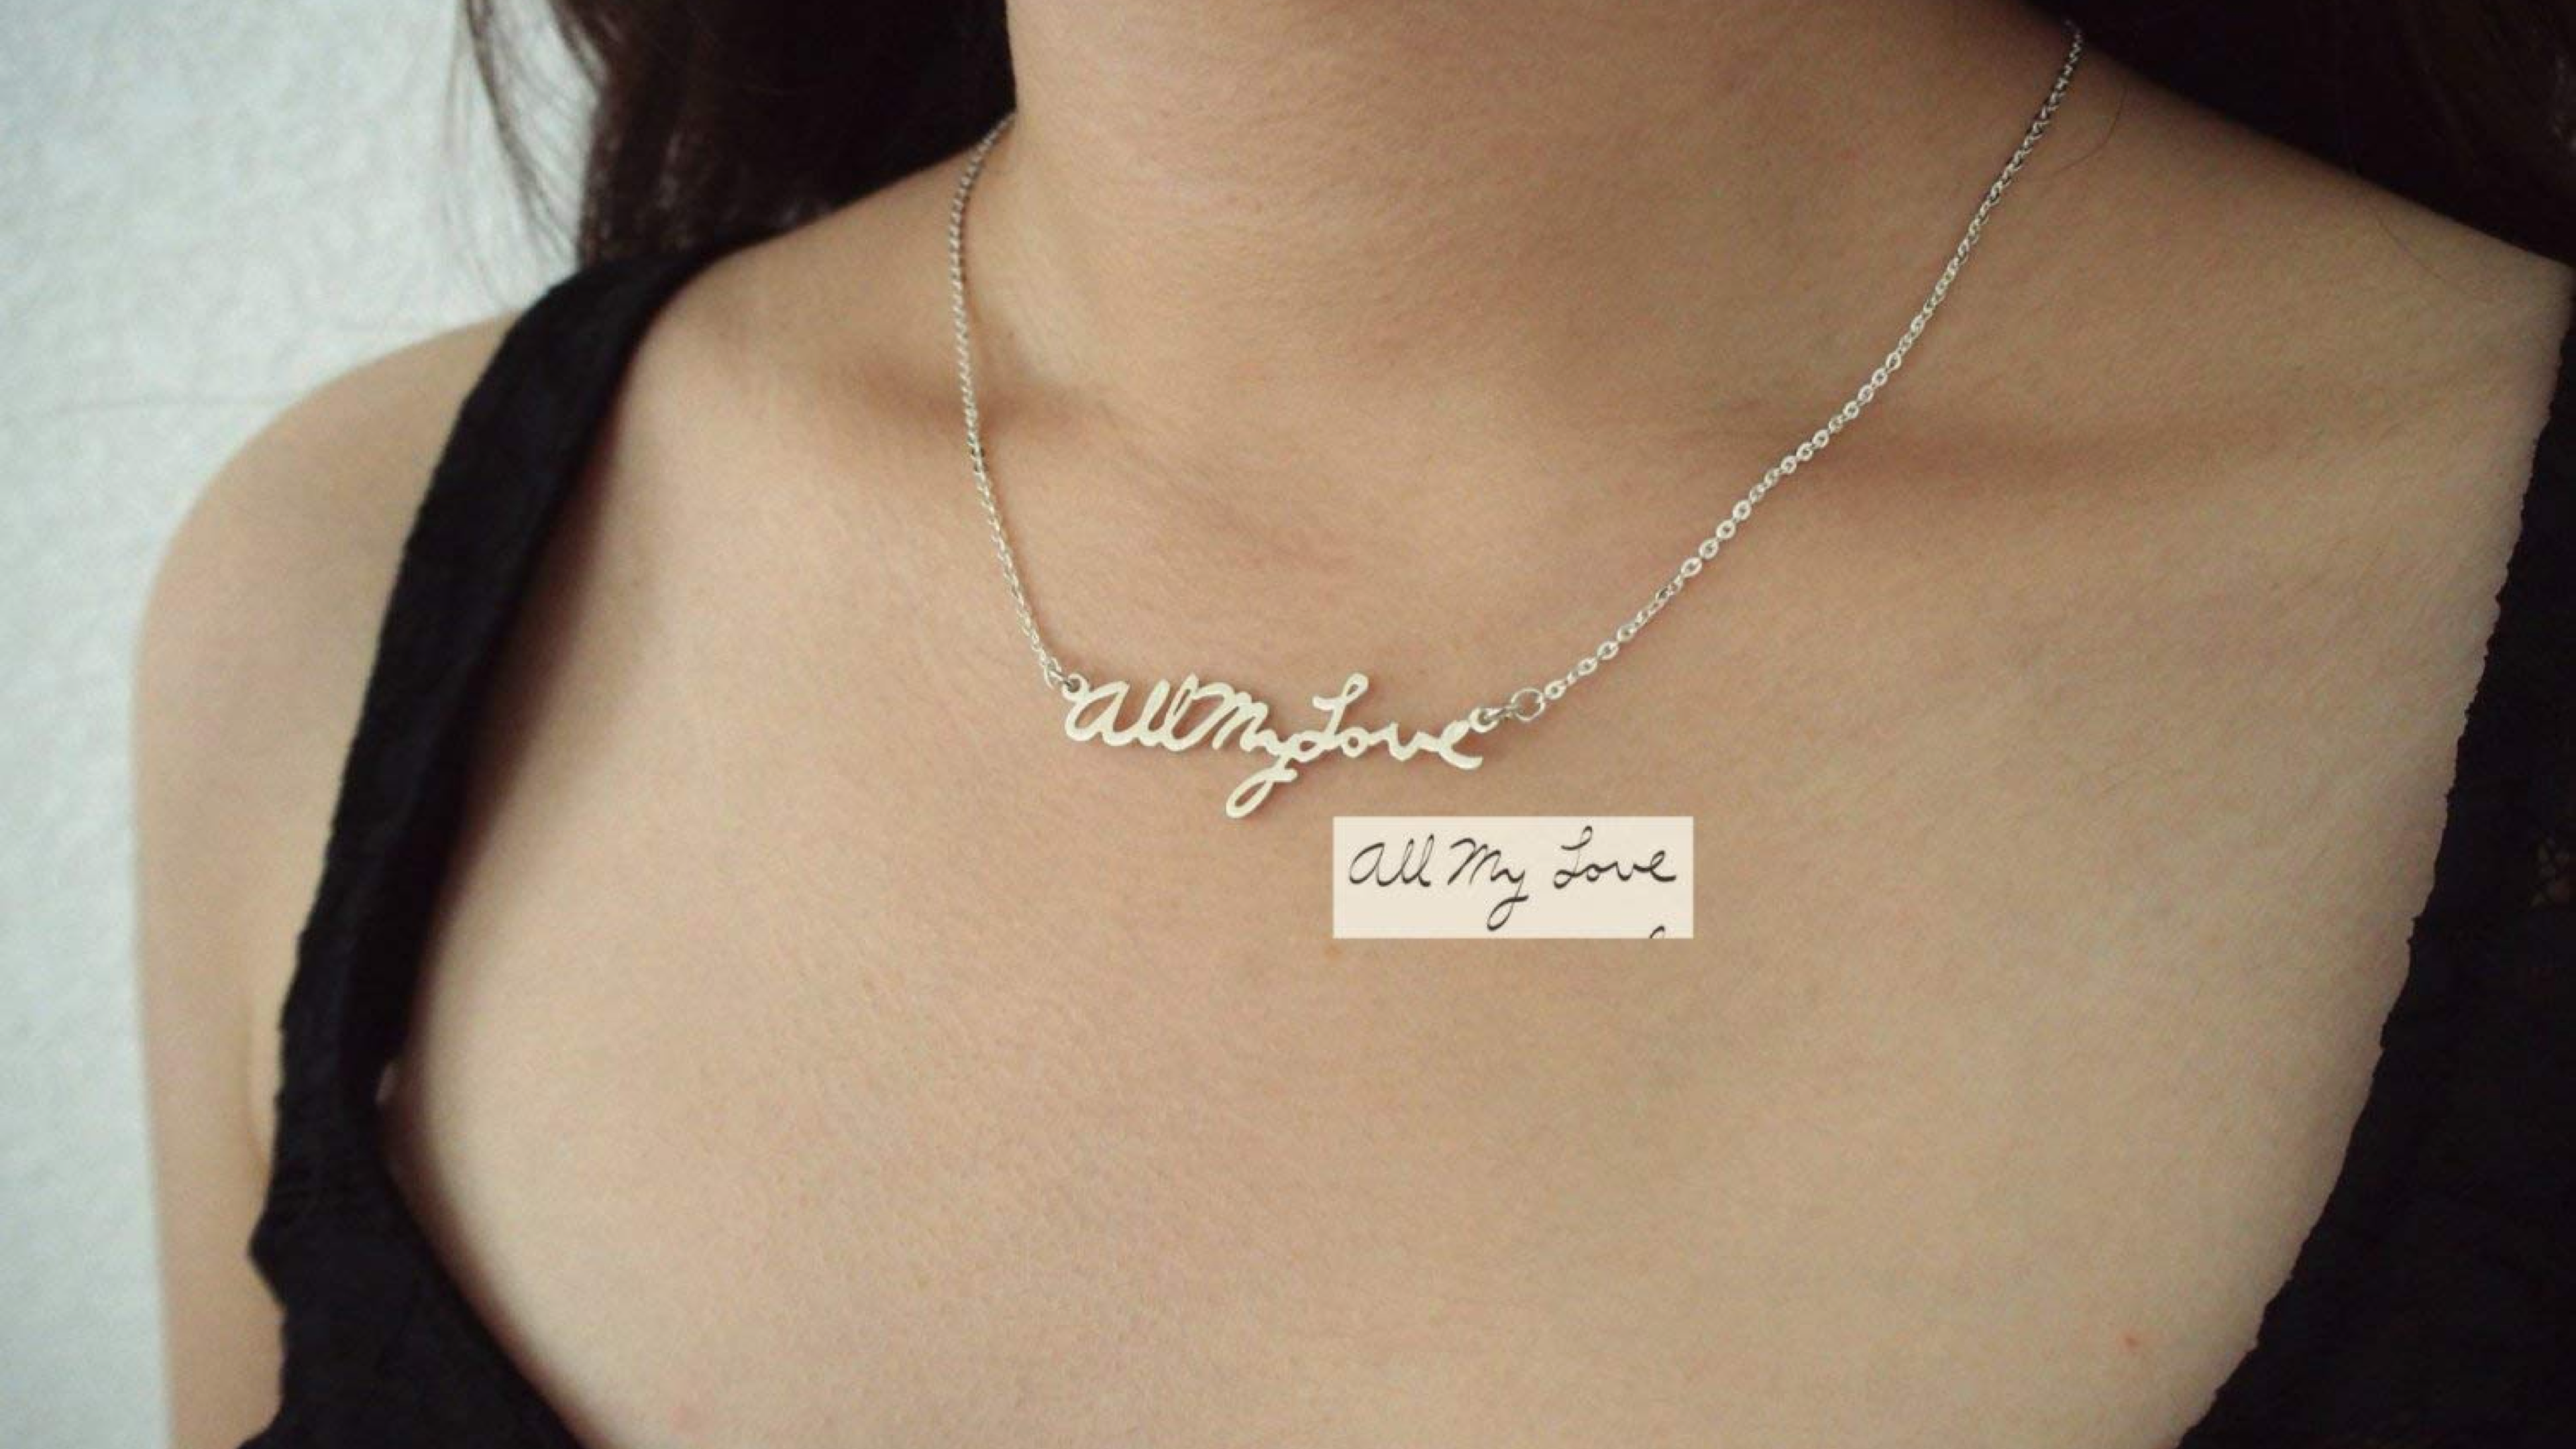 A piece of jewelry in your handwriting